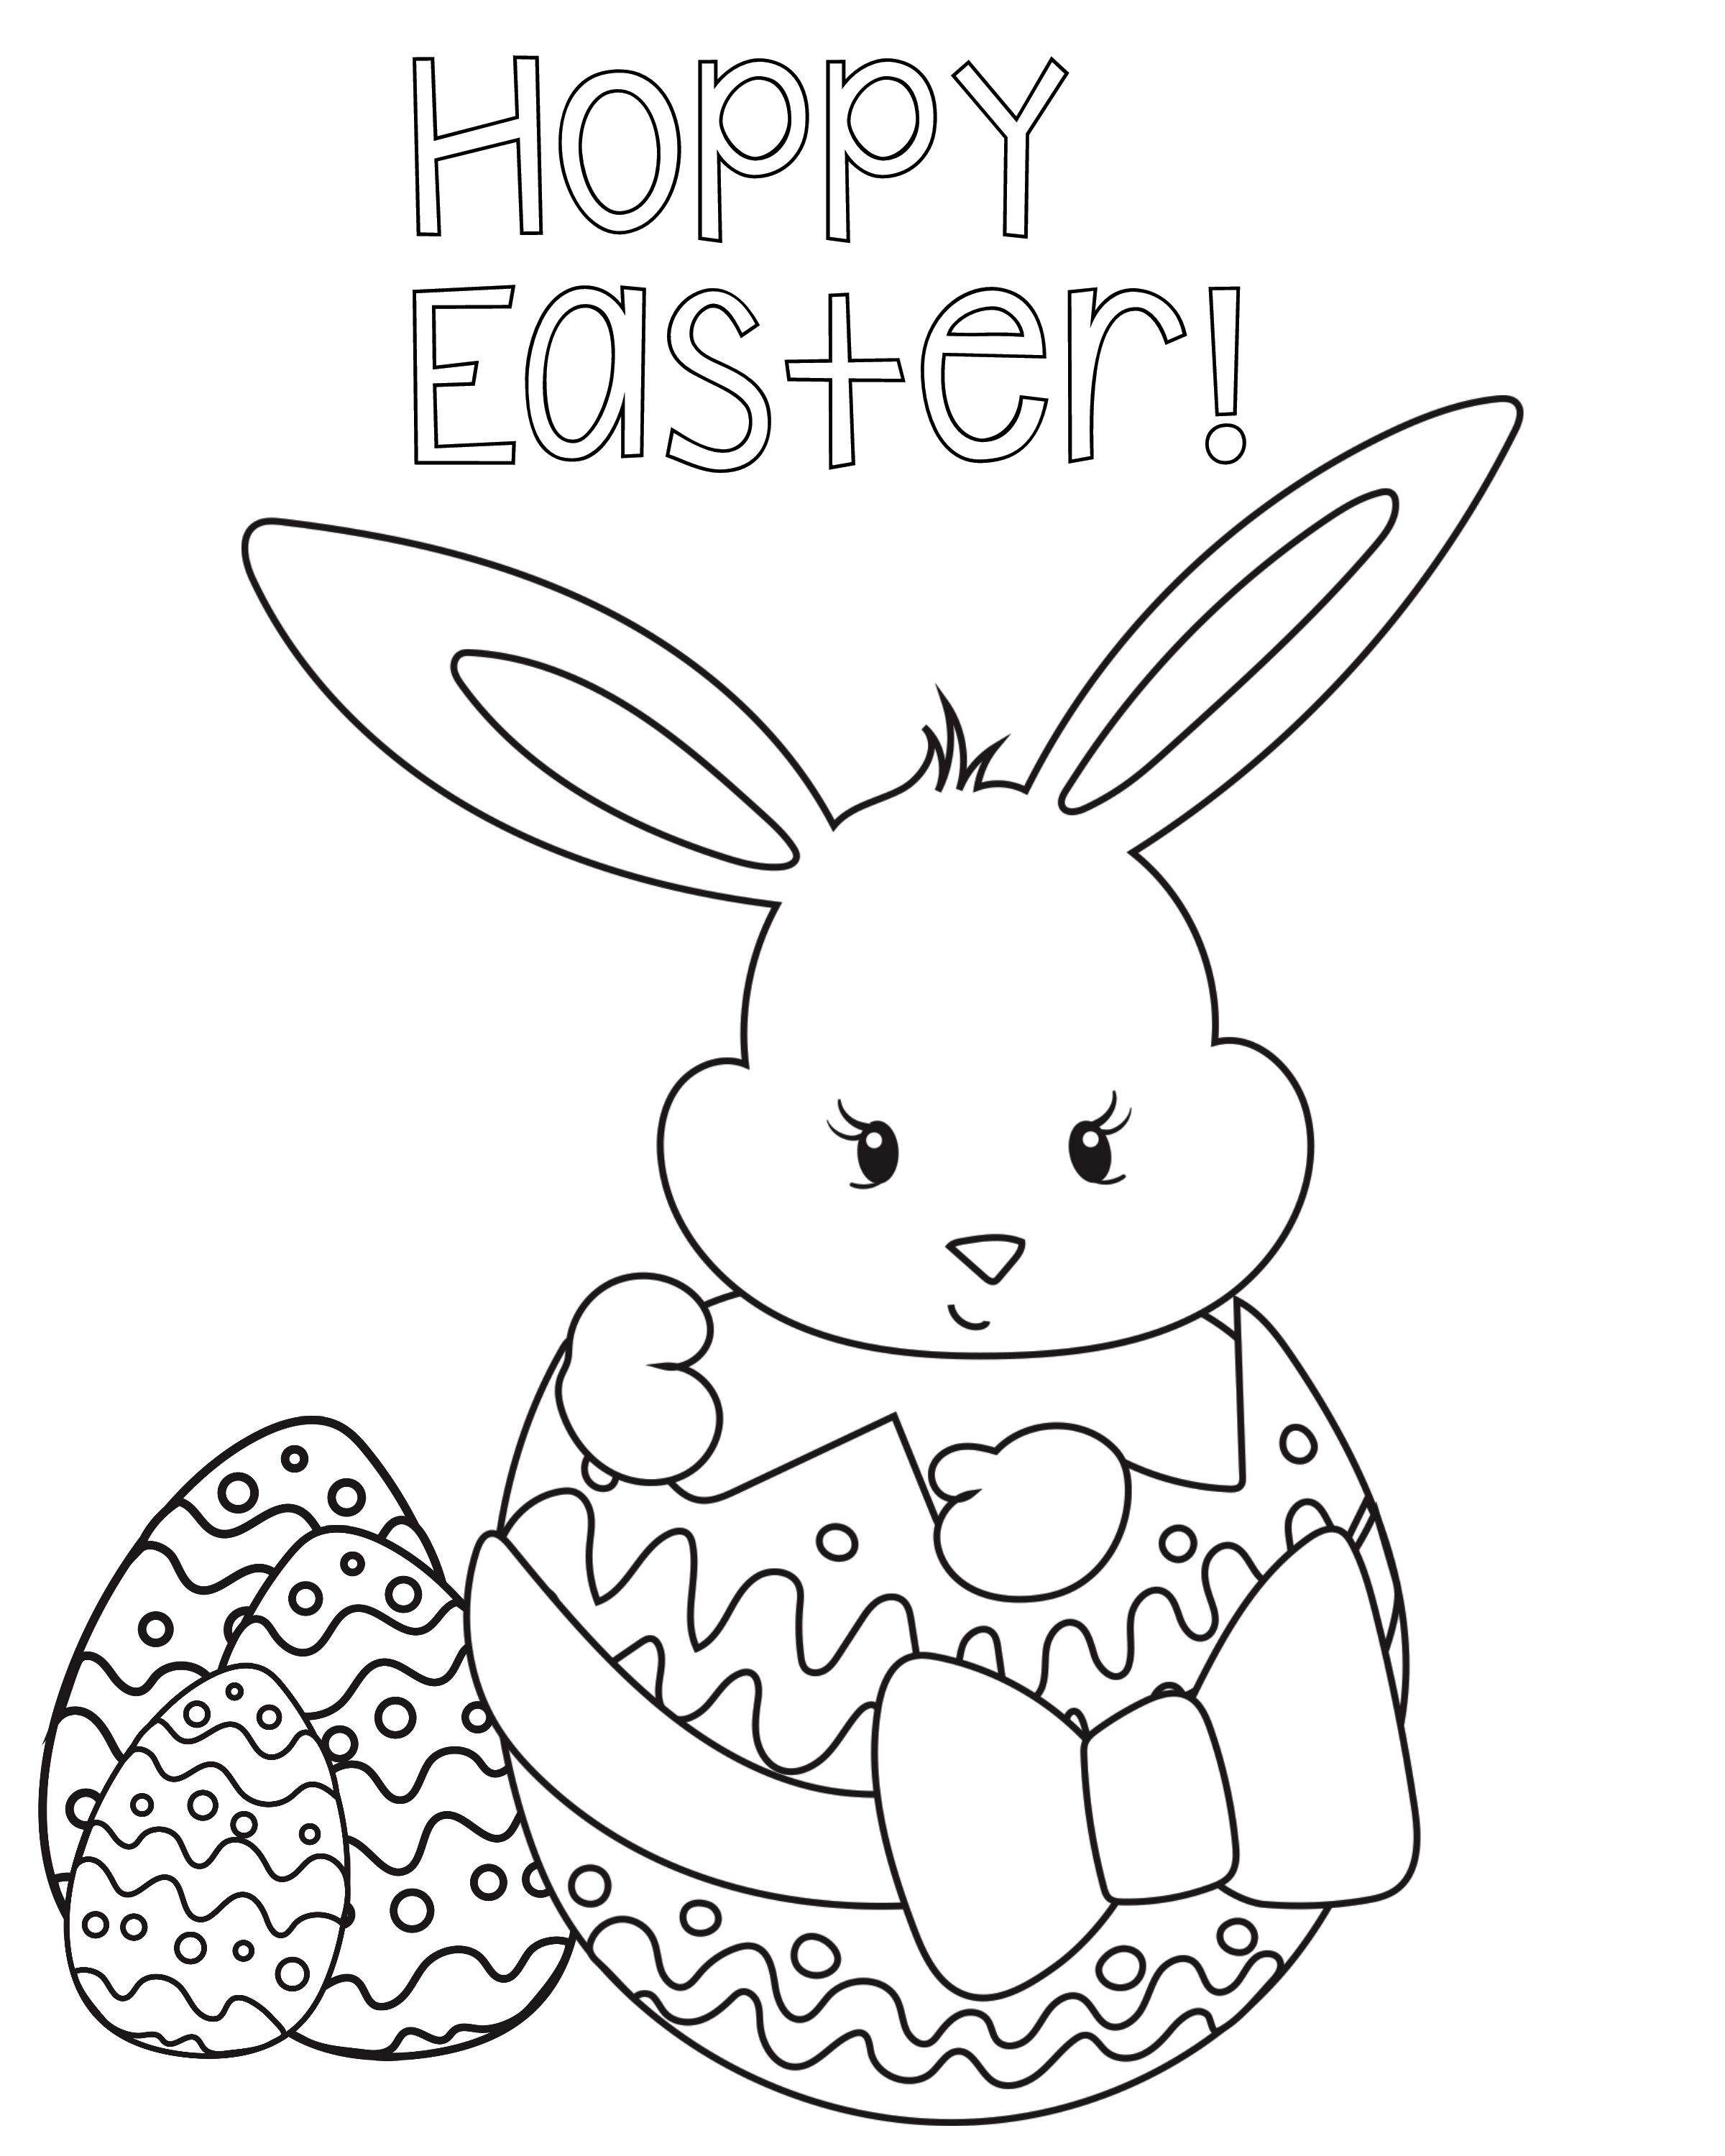 happy-easter-coloring-pages-best-coloring-pages-for-kids